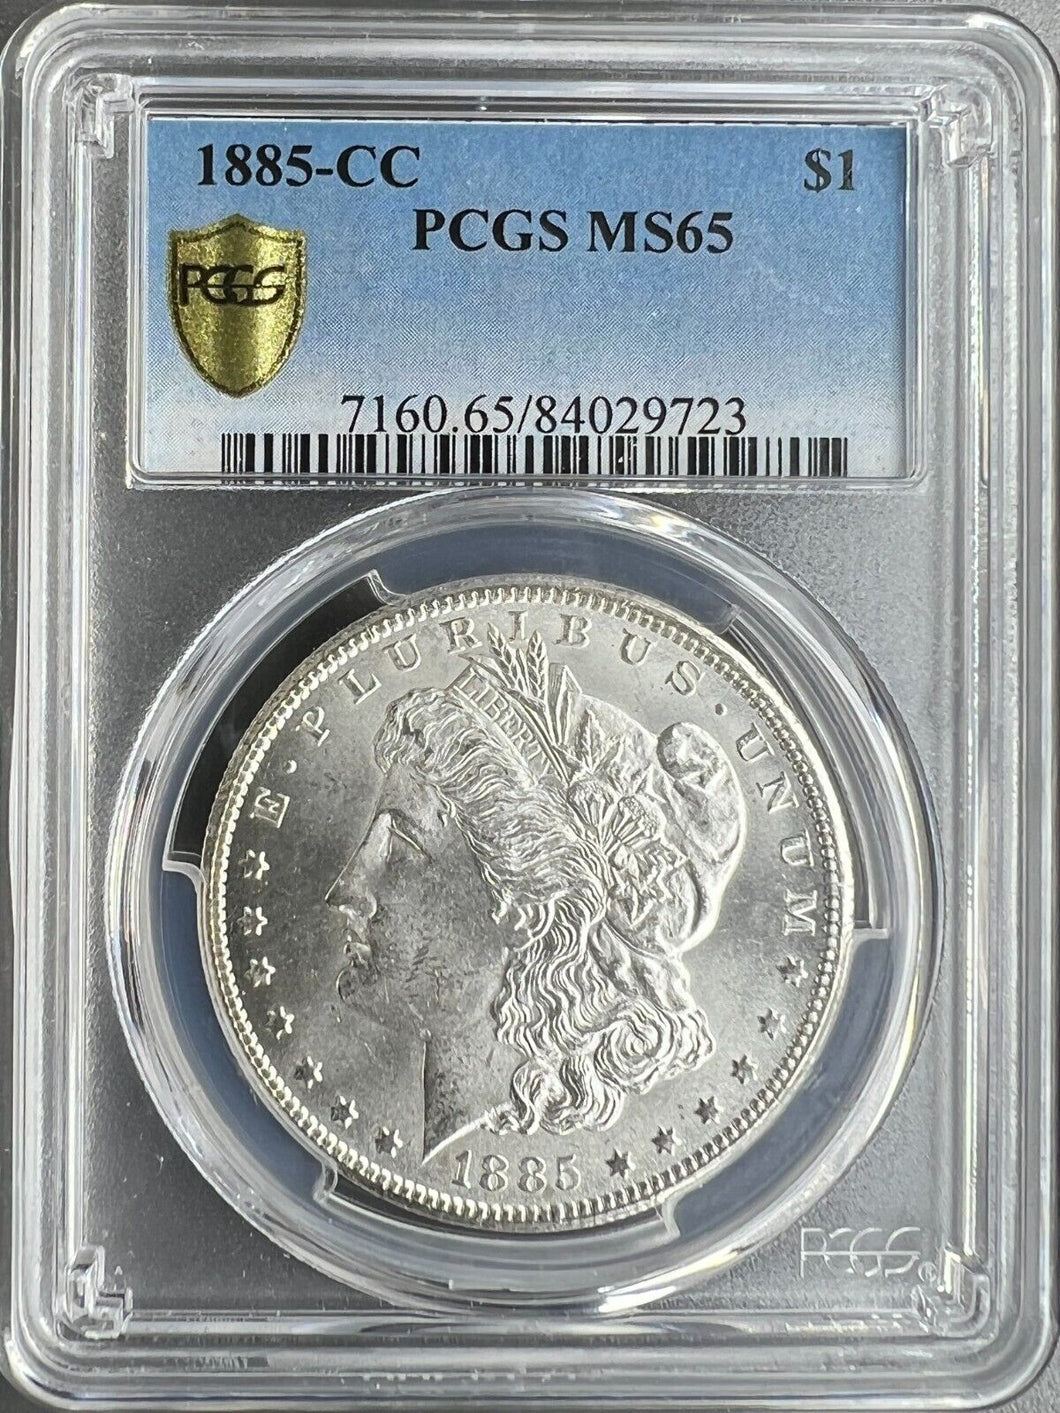 1885-CC Morgan Silver Dollar PCGS MS65 - - Blast White & With Frosty Devices